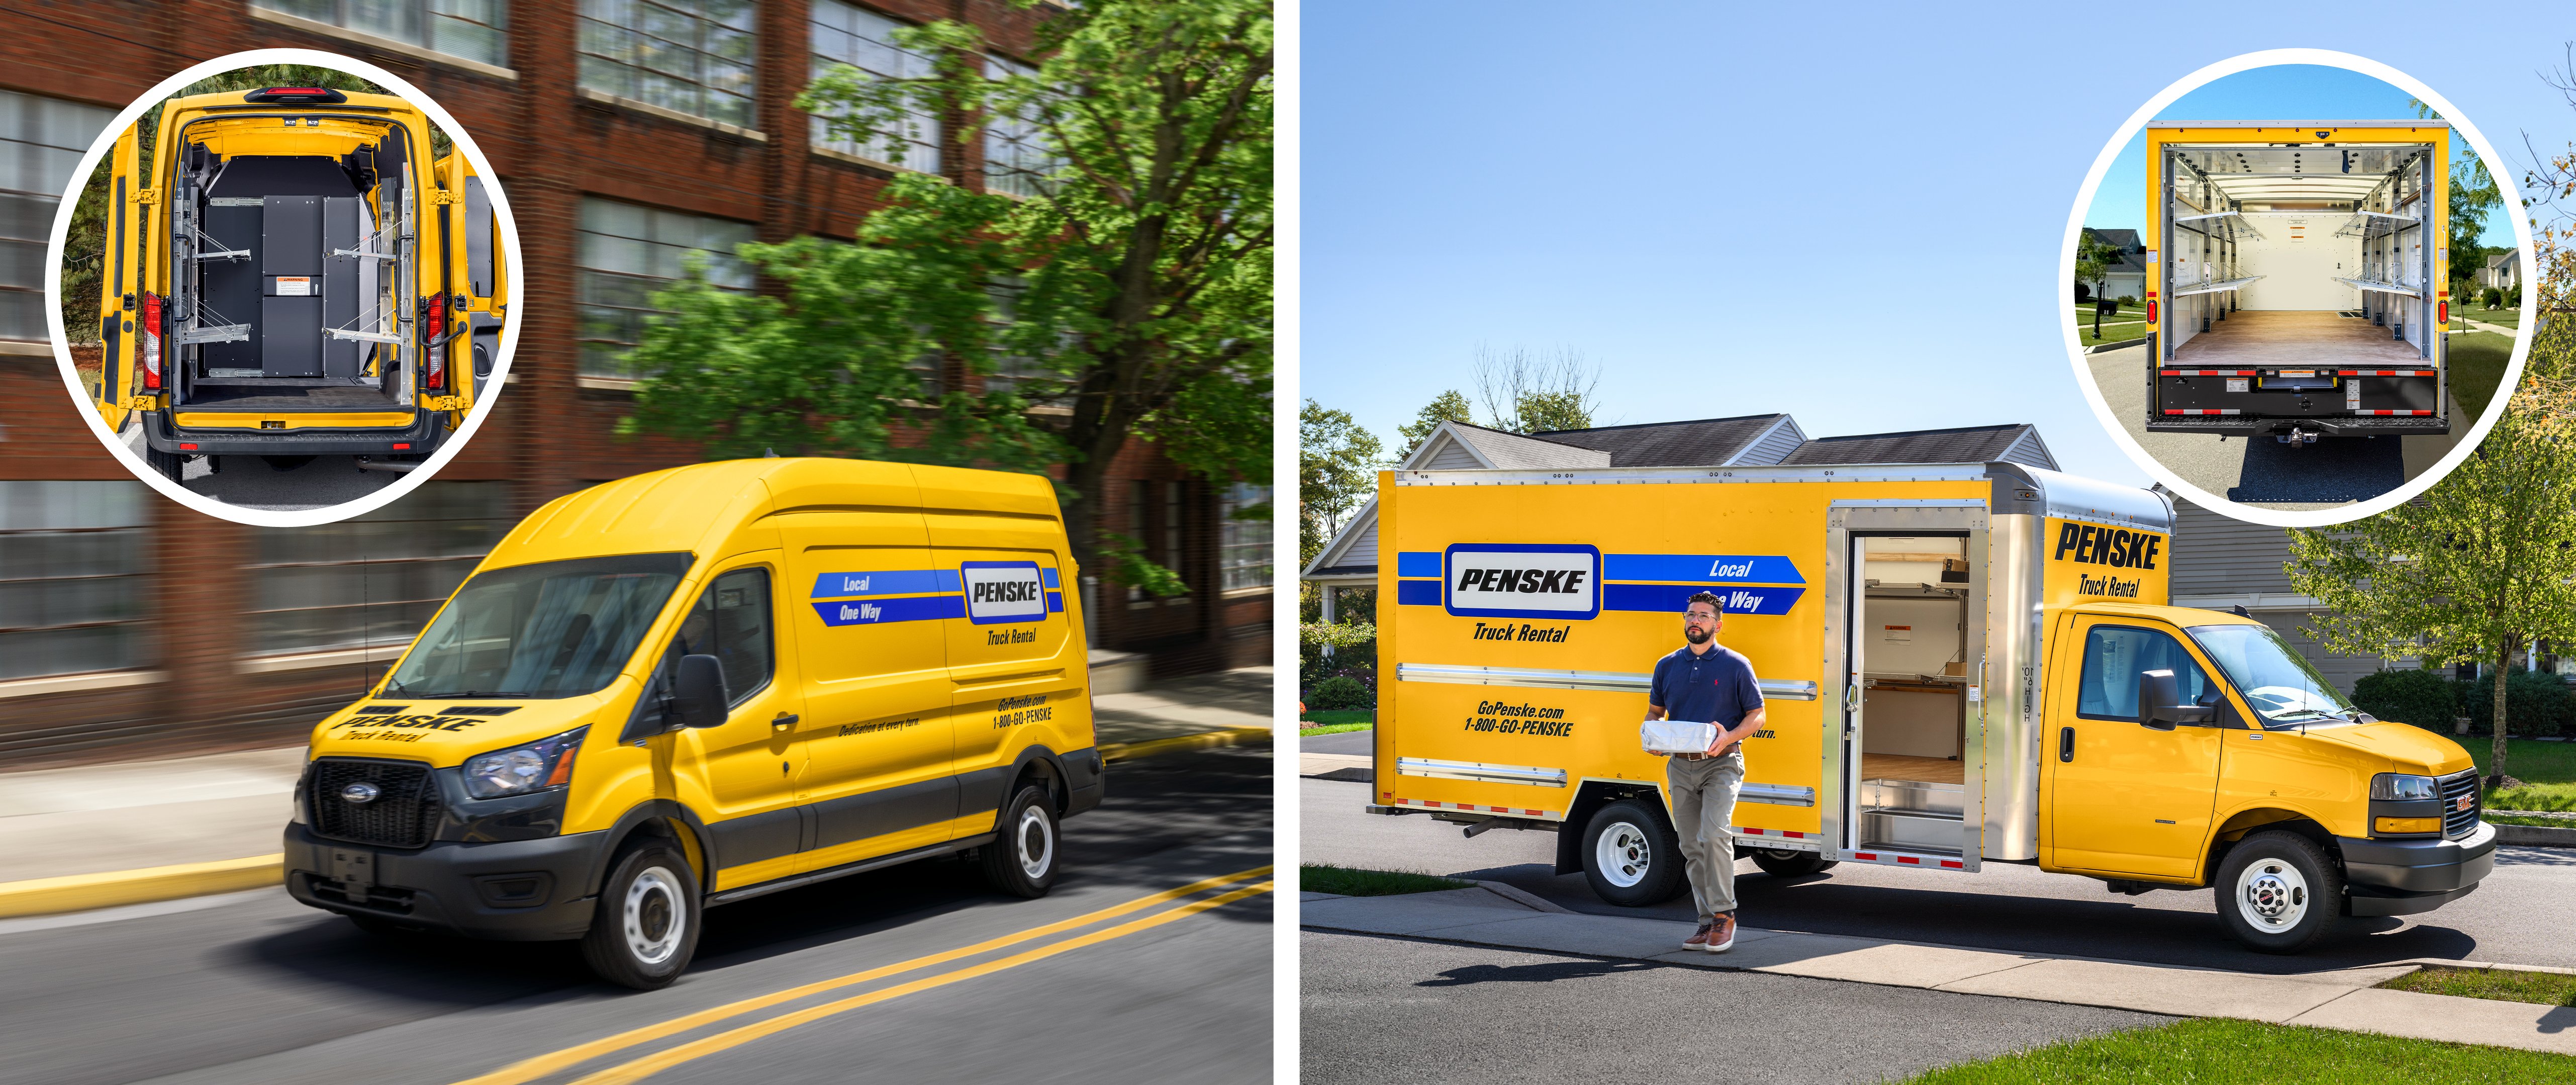 Penske delivery vehicles with shelving units